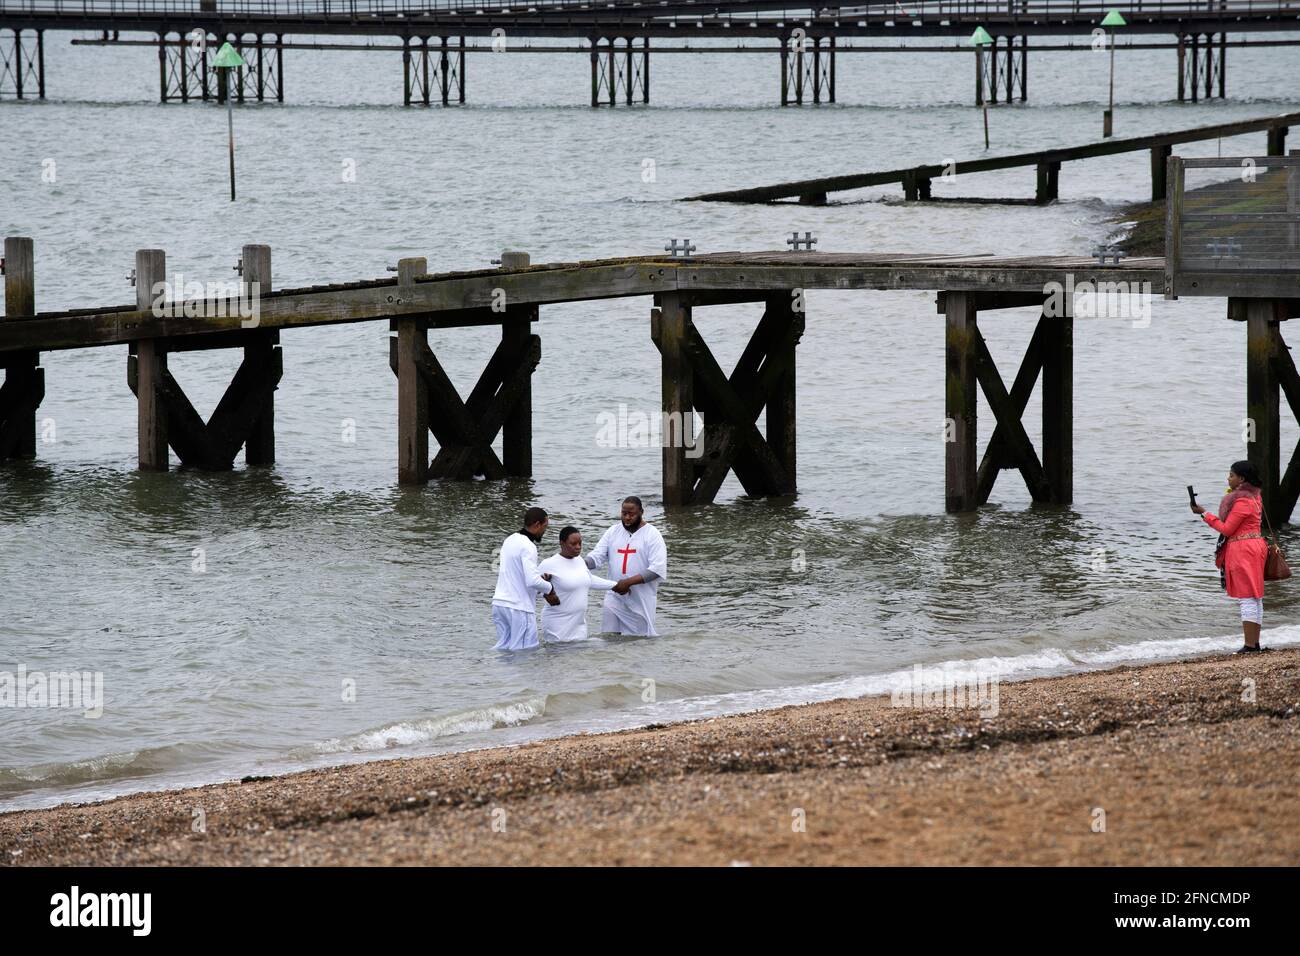 Southend on Sea Essex England UK 15 May 2021 Full body emersion baptism in the Thames Estuary at Southend Stock Photo